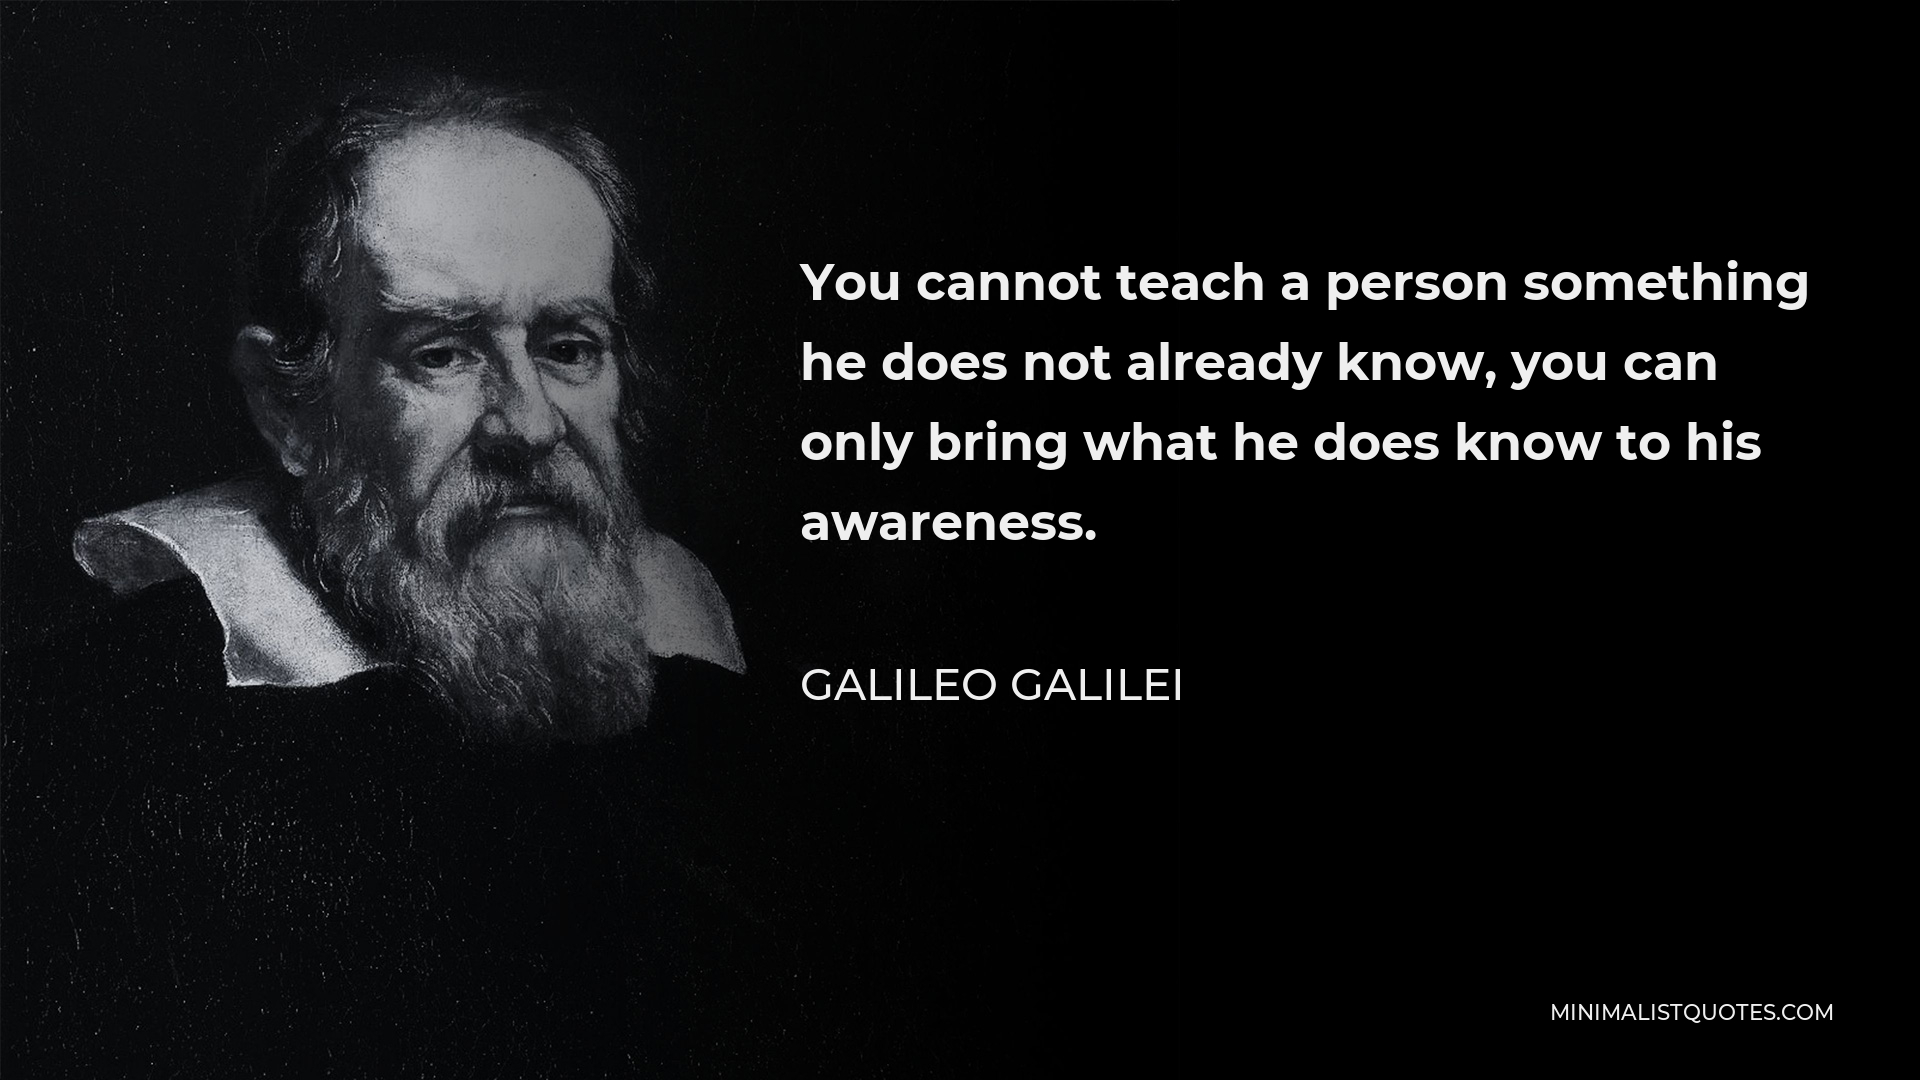 Galileo Galilei Quote - You cannot teach a person something he does not already know, you can only bring what he does know to his awareness.